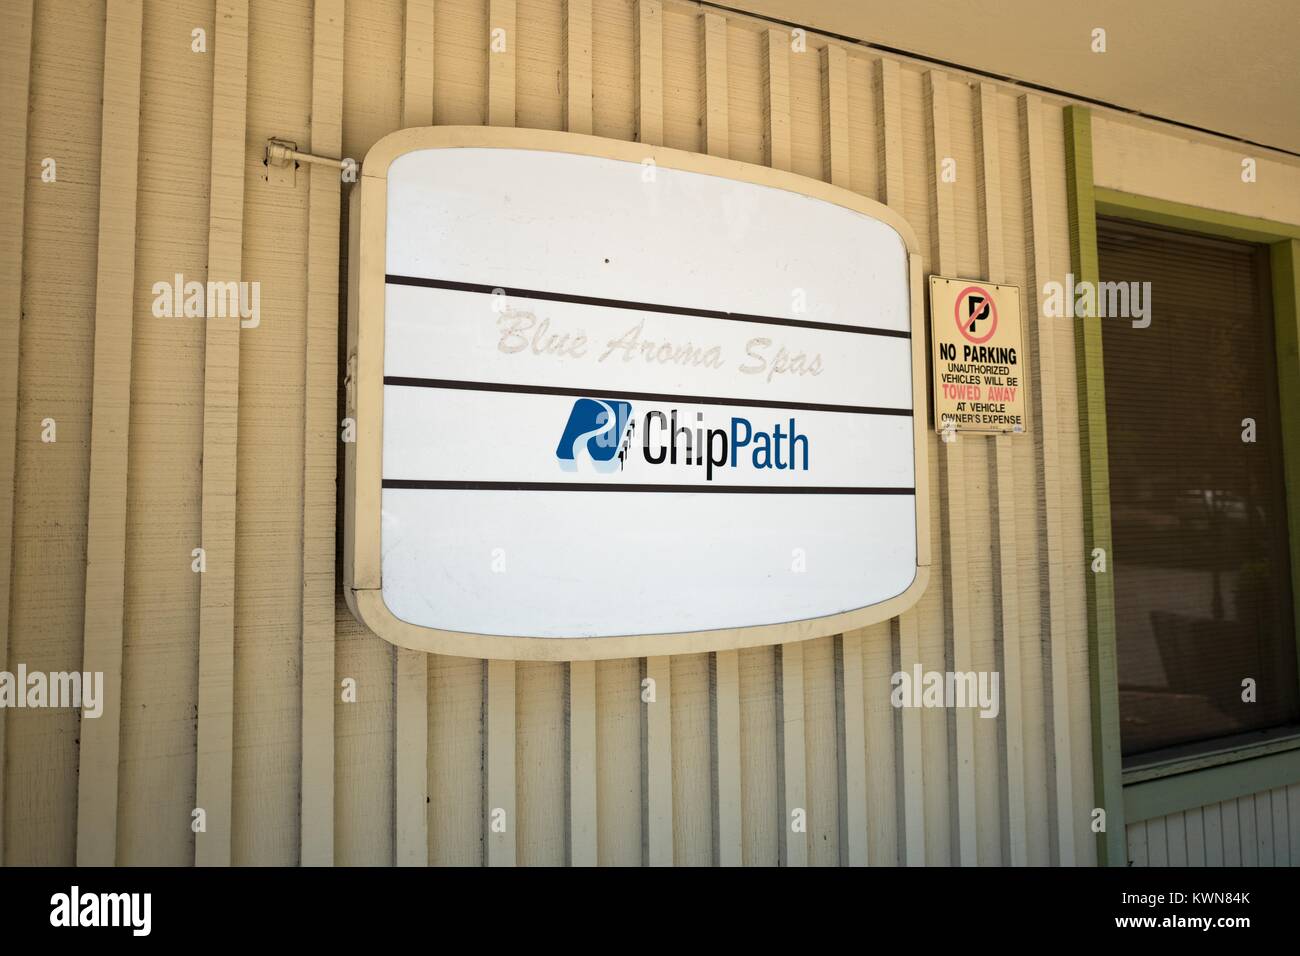 Signage for Chip Path Design Systems, a software company located near the Apple Park, known colloquially as 'The Spaceship', the new headquarters of Apple Inc in the Silicon Valley town of Cupertino, California, July 25, 2017. Since Apple's announcement of its new headquarters, commercial real estate prices near the headquarter's site have increased dramatically, and several new developments have been planned. Stock Photo